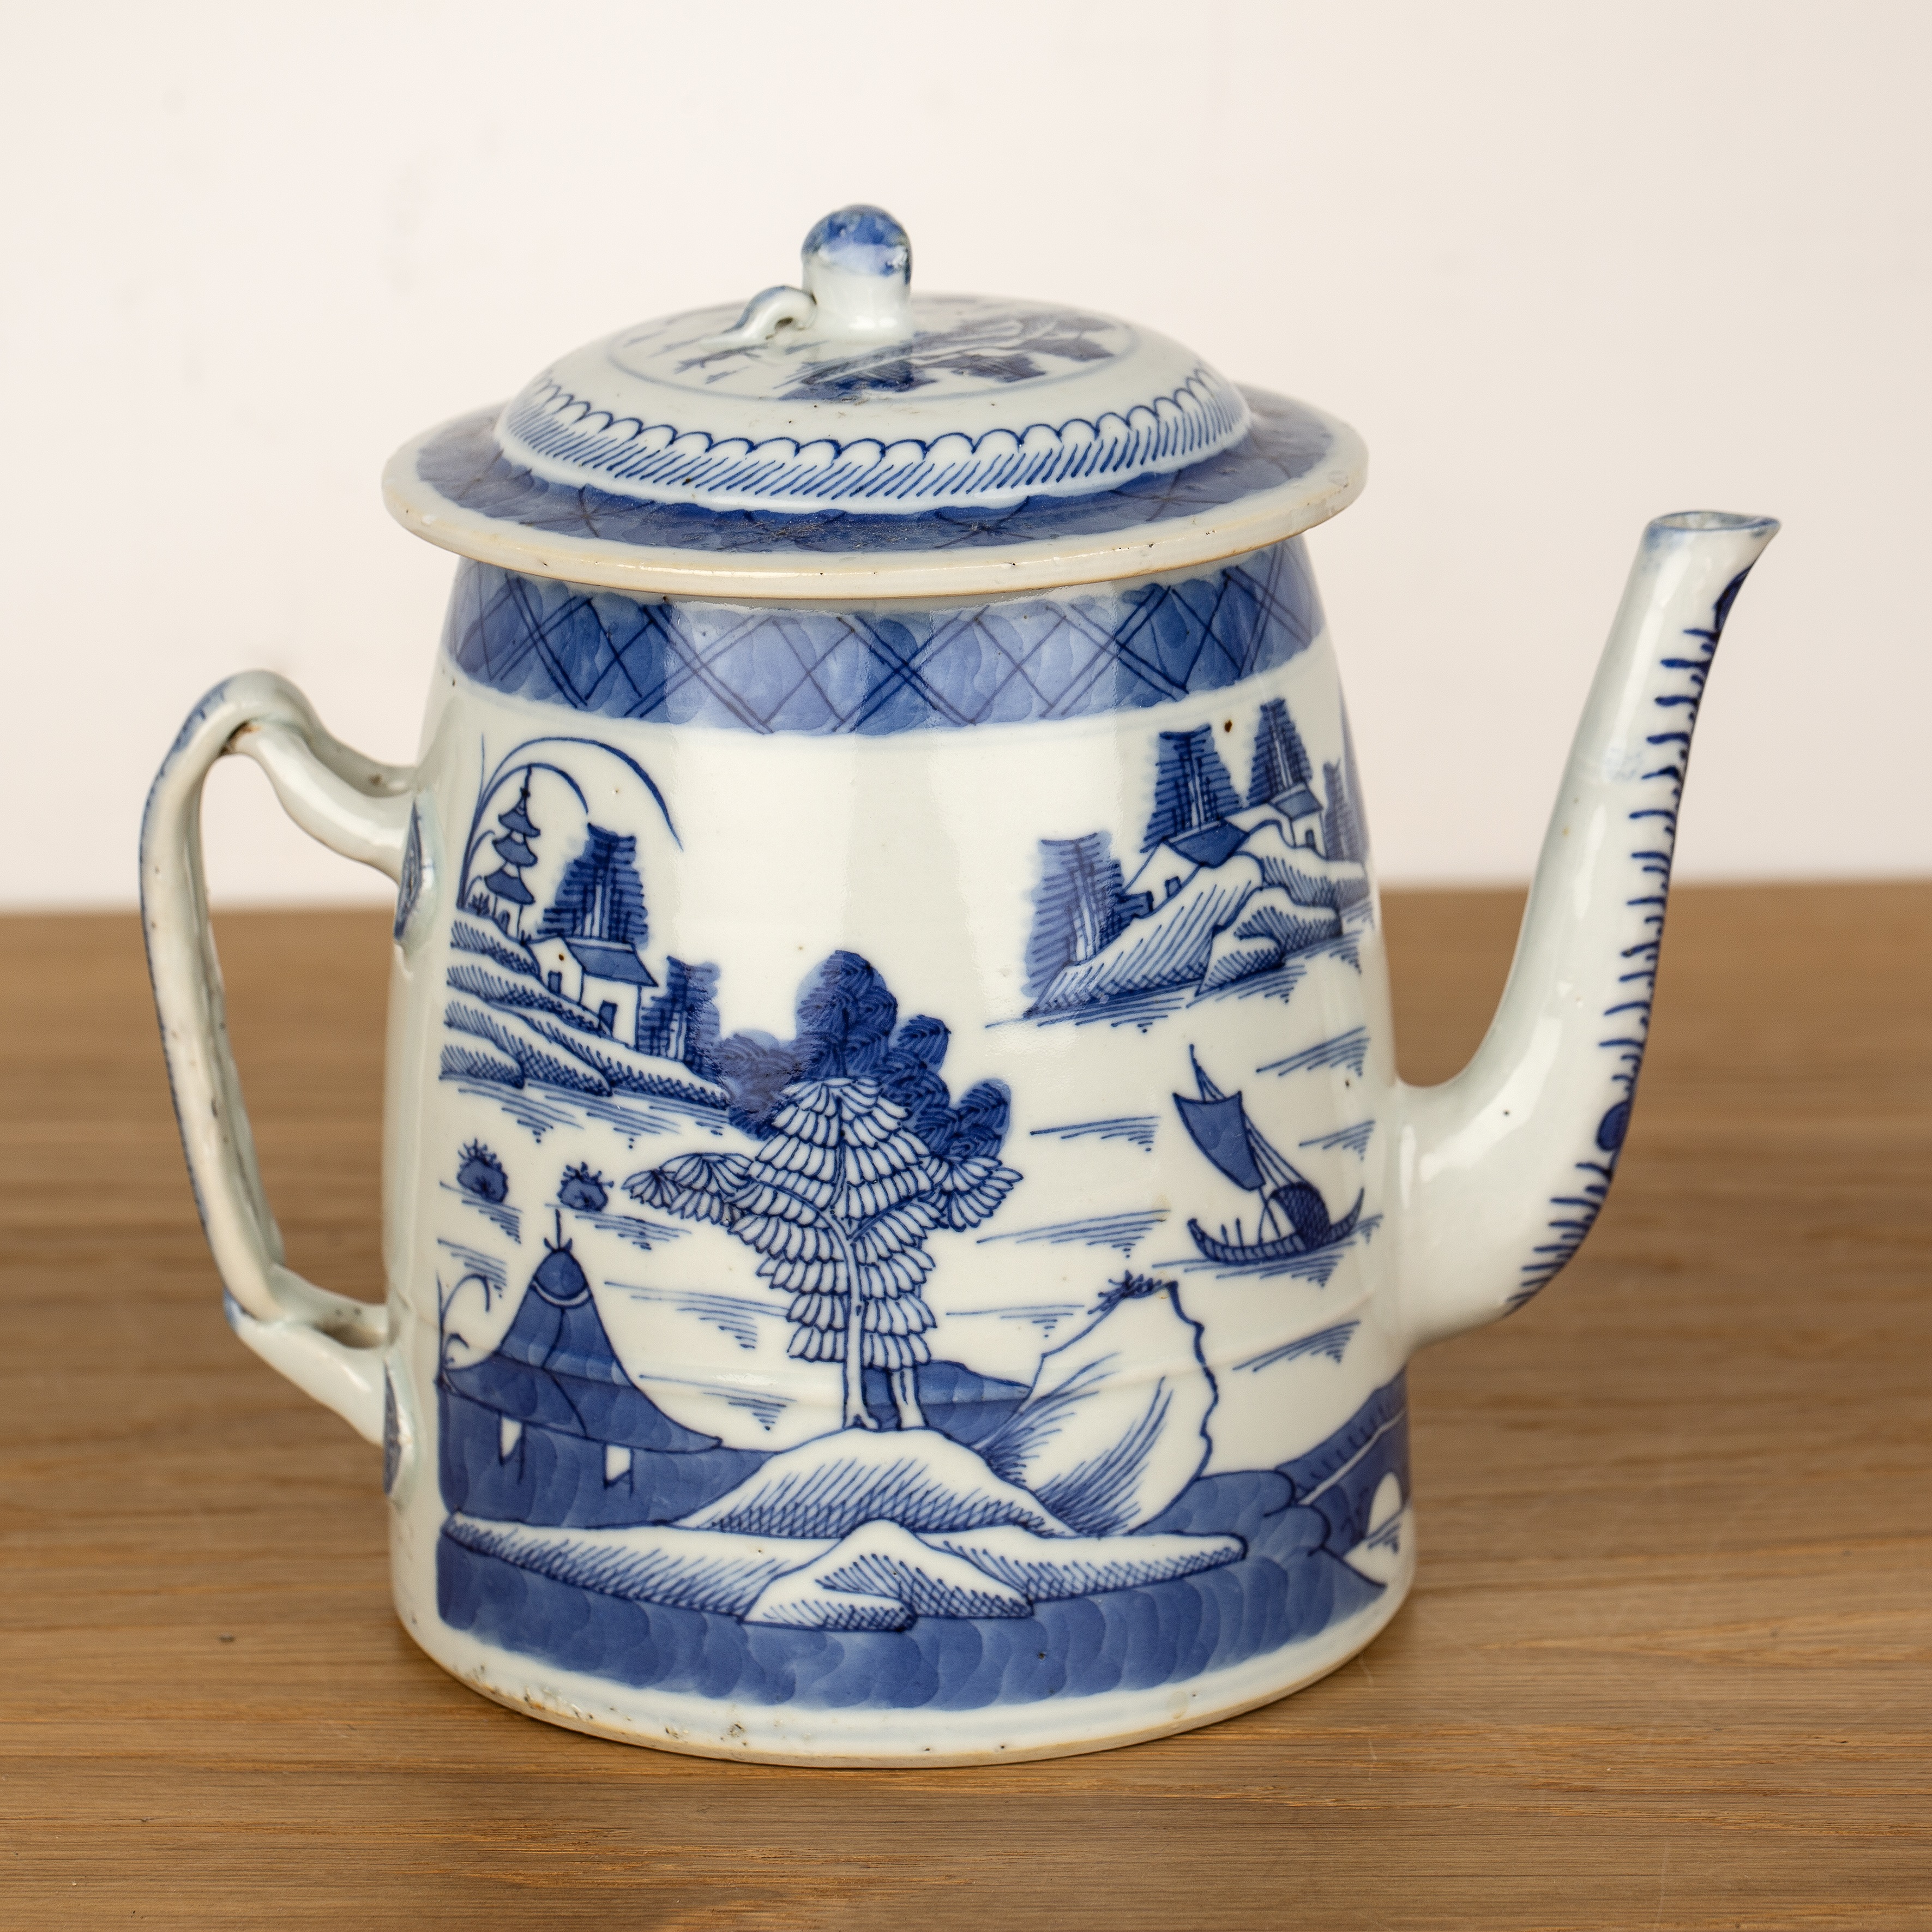 Blue and white export porcelain teapot Chinese, 19th Century painted with temples and a lake - Image 5 of 6